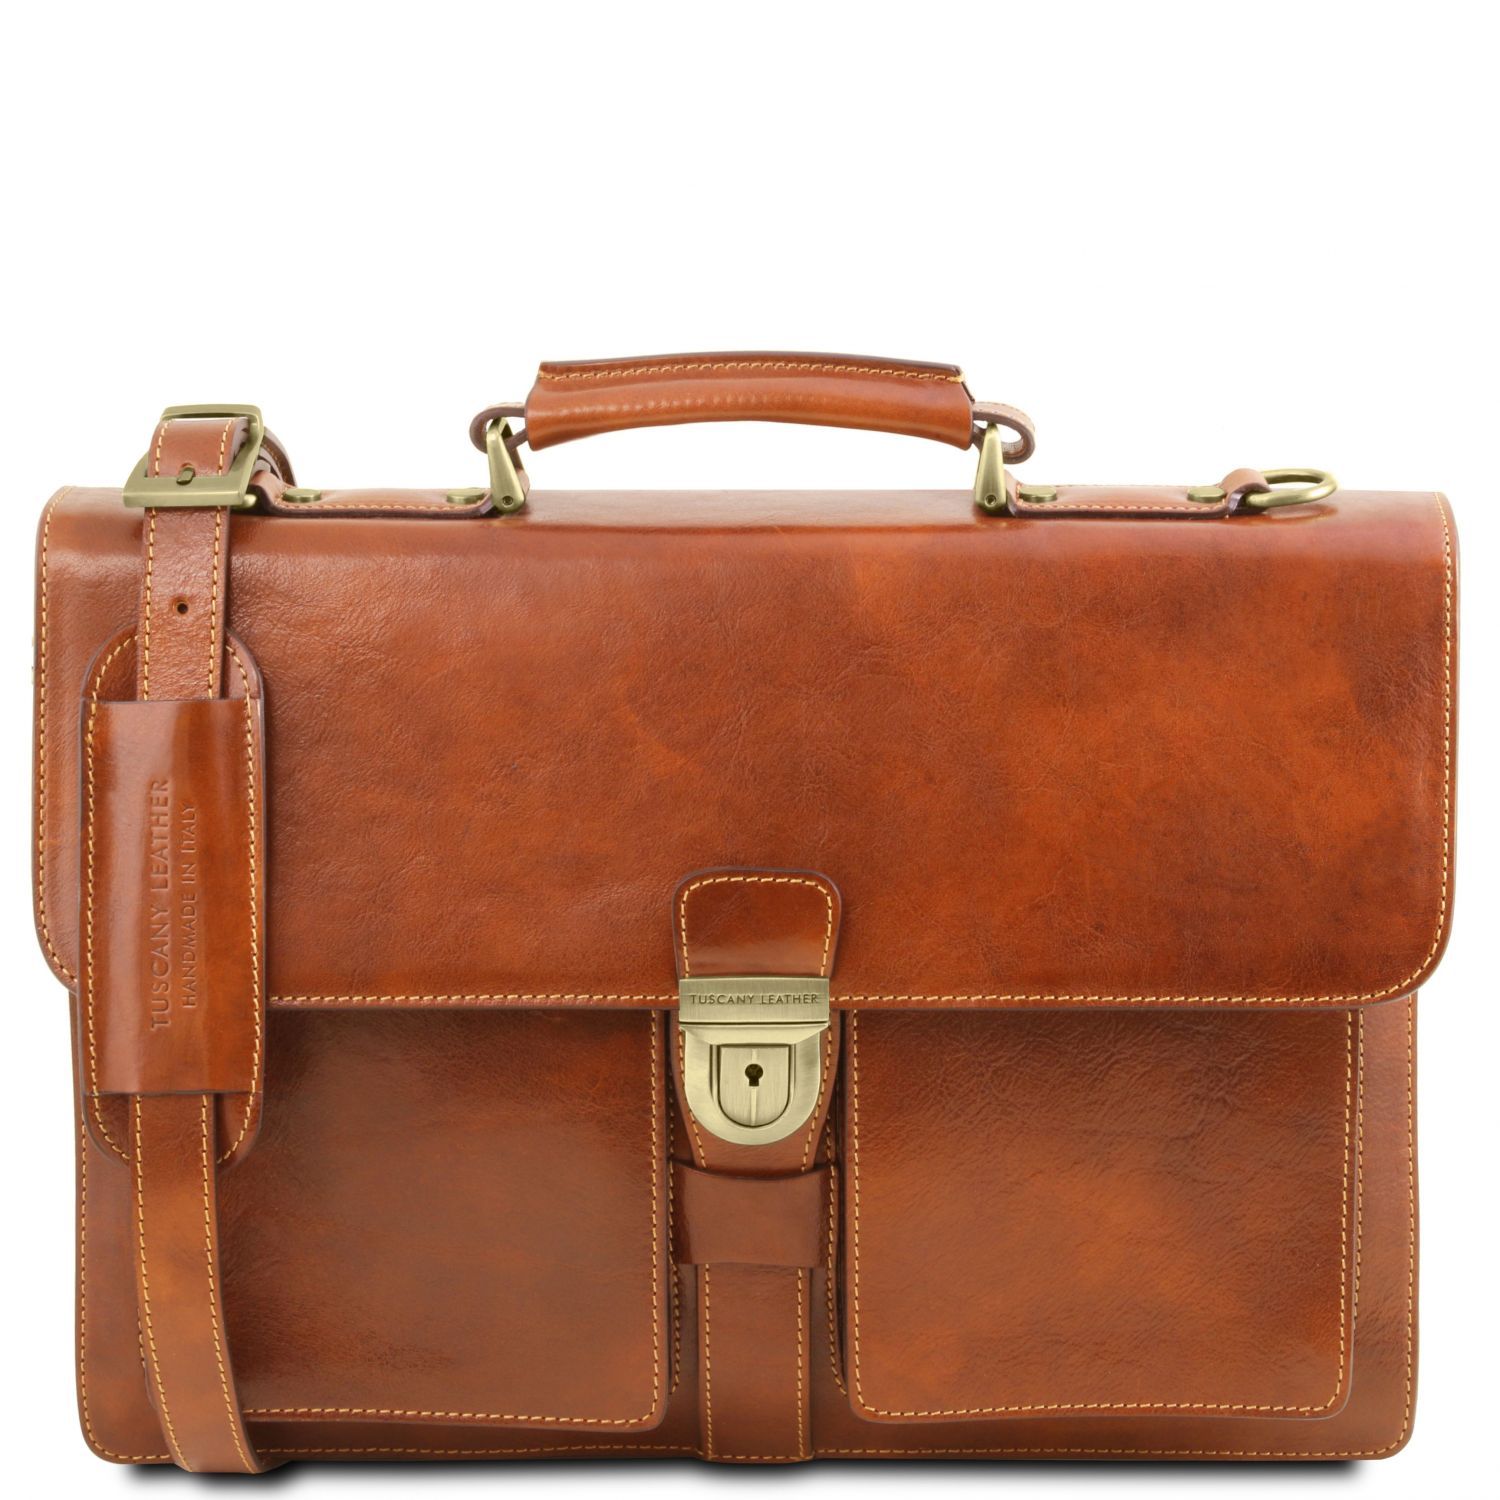 Assisi Leather briefcase 3 compartments - Honey